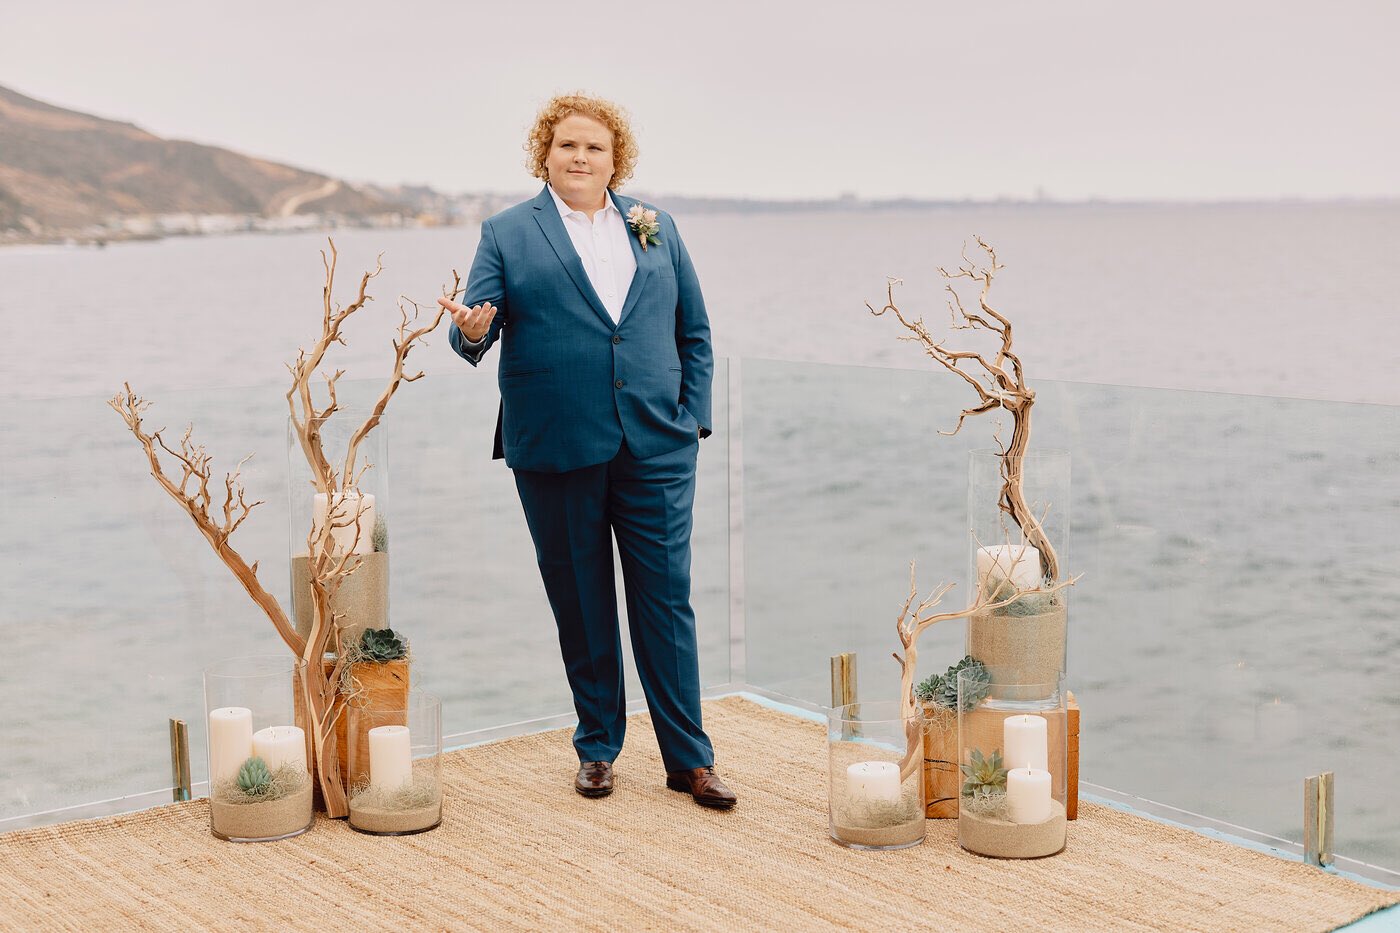 Fortune Feimster On Twitter I M Talking All Things Bachelor On This Week S Podcast With My Fun Guest Nick Viall Viallnicholas28 And Here I Am At My Wedding Doing My Best Rose Ceremony